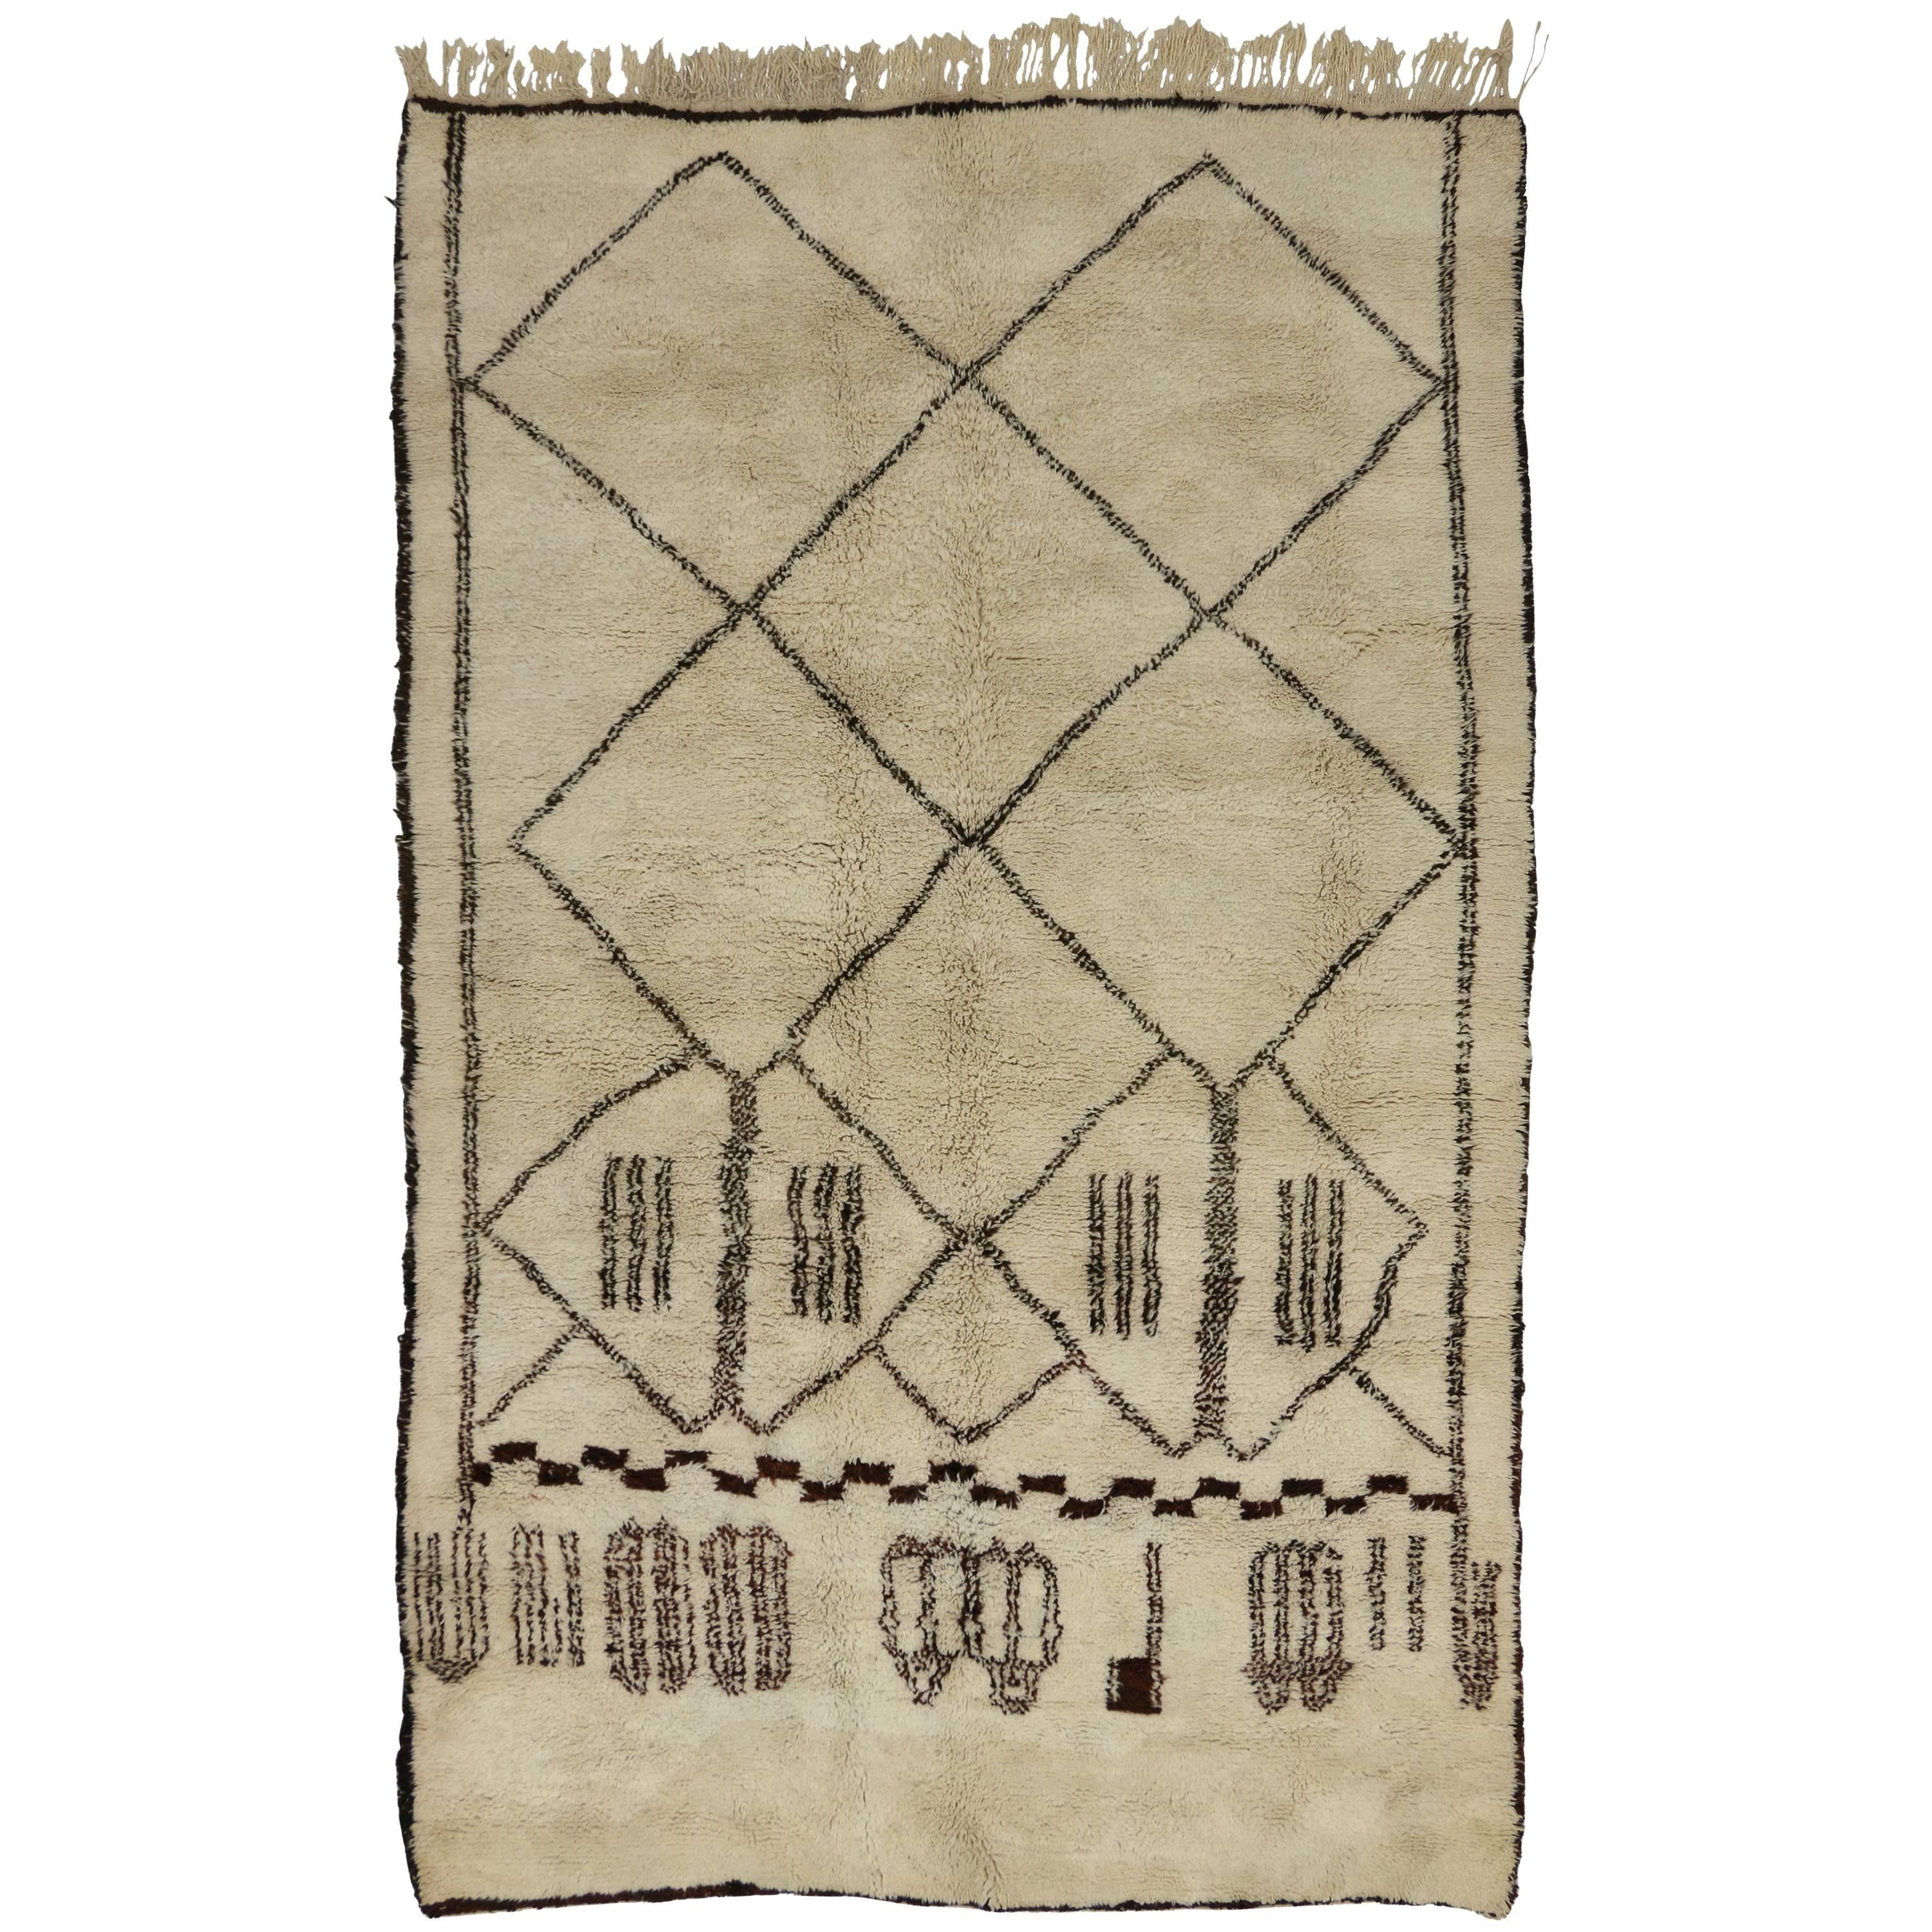 Contemporary Berber Moroccan Rug with Modern Style and Bauhaus Design